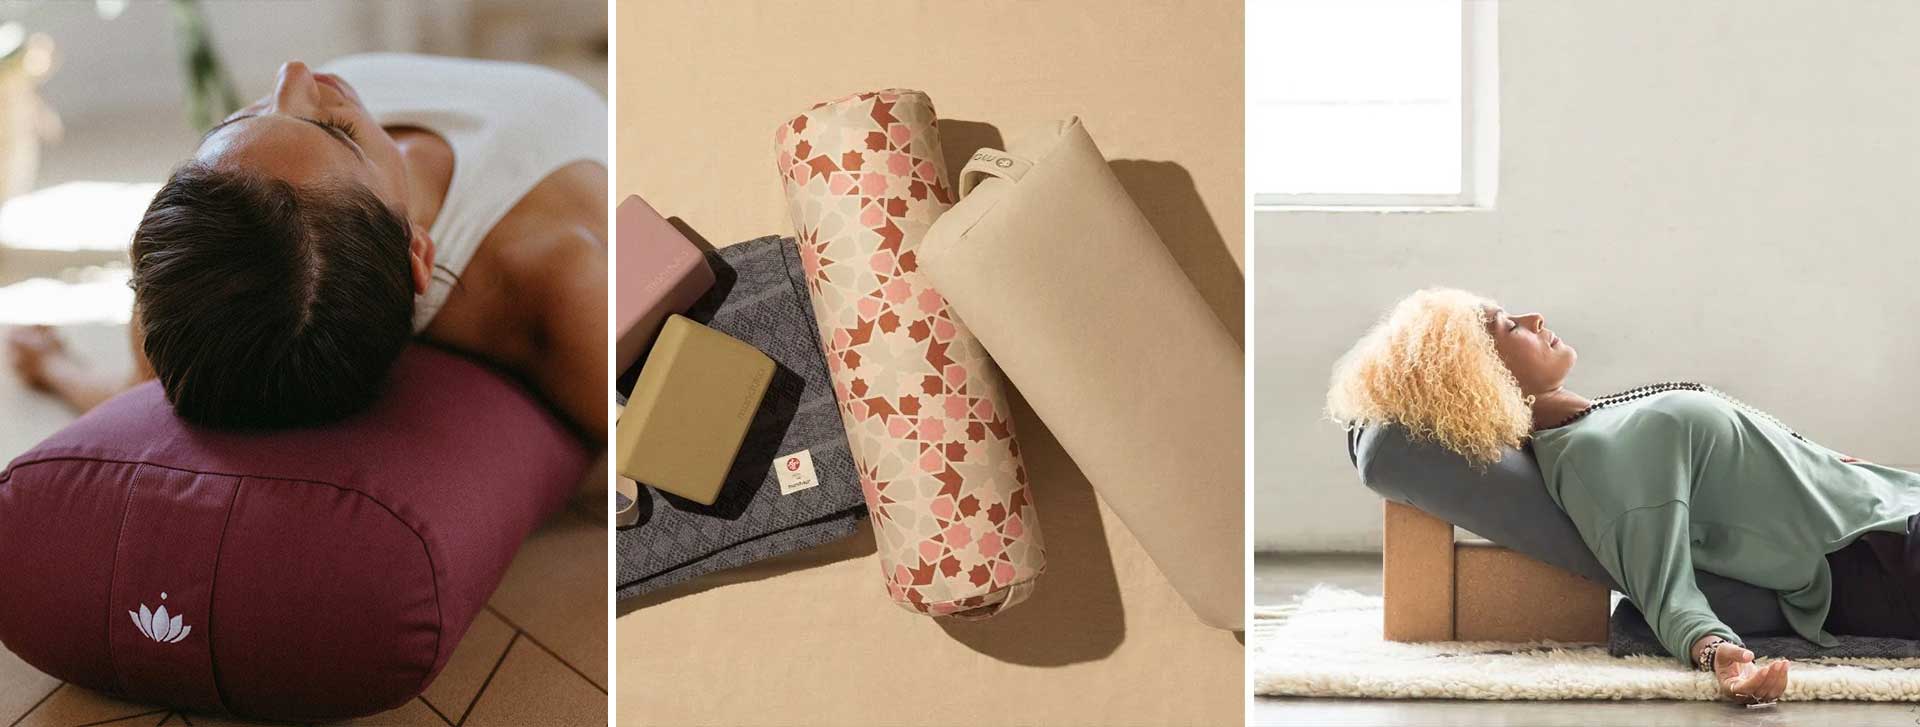 How to choose the right bolster for yoga?